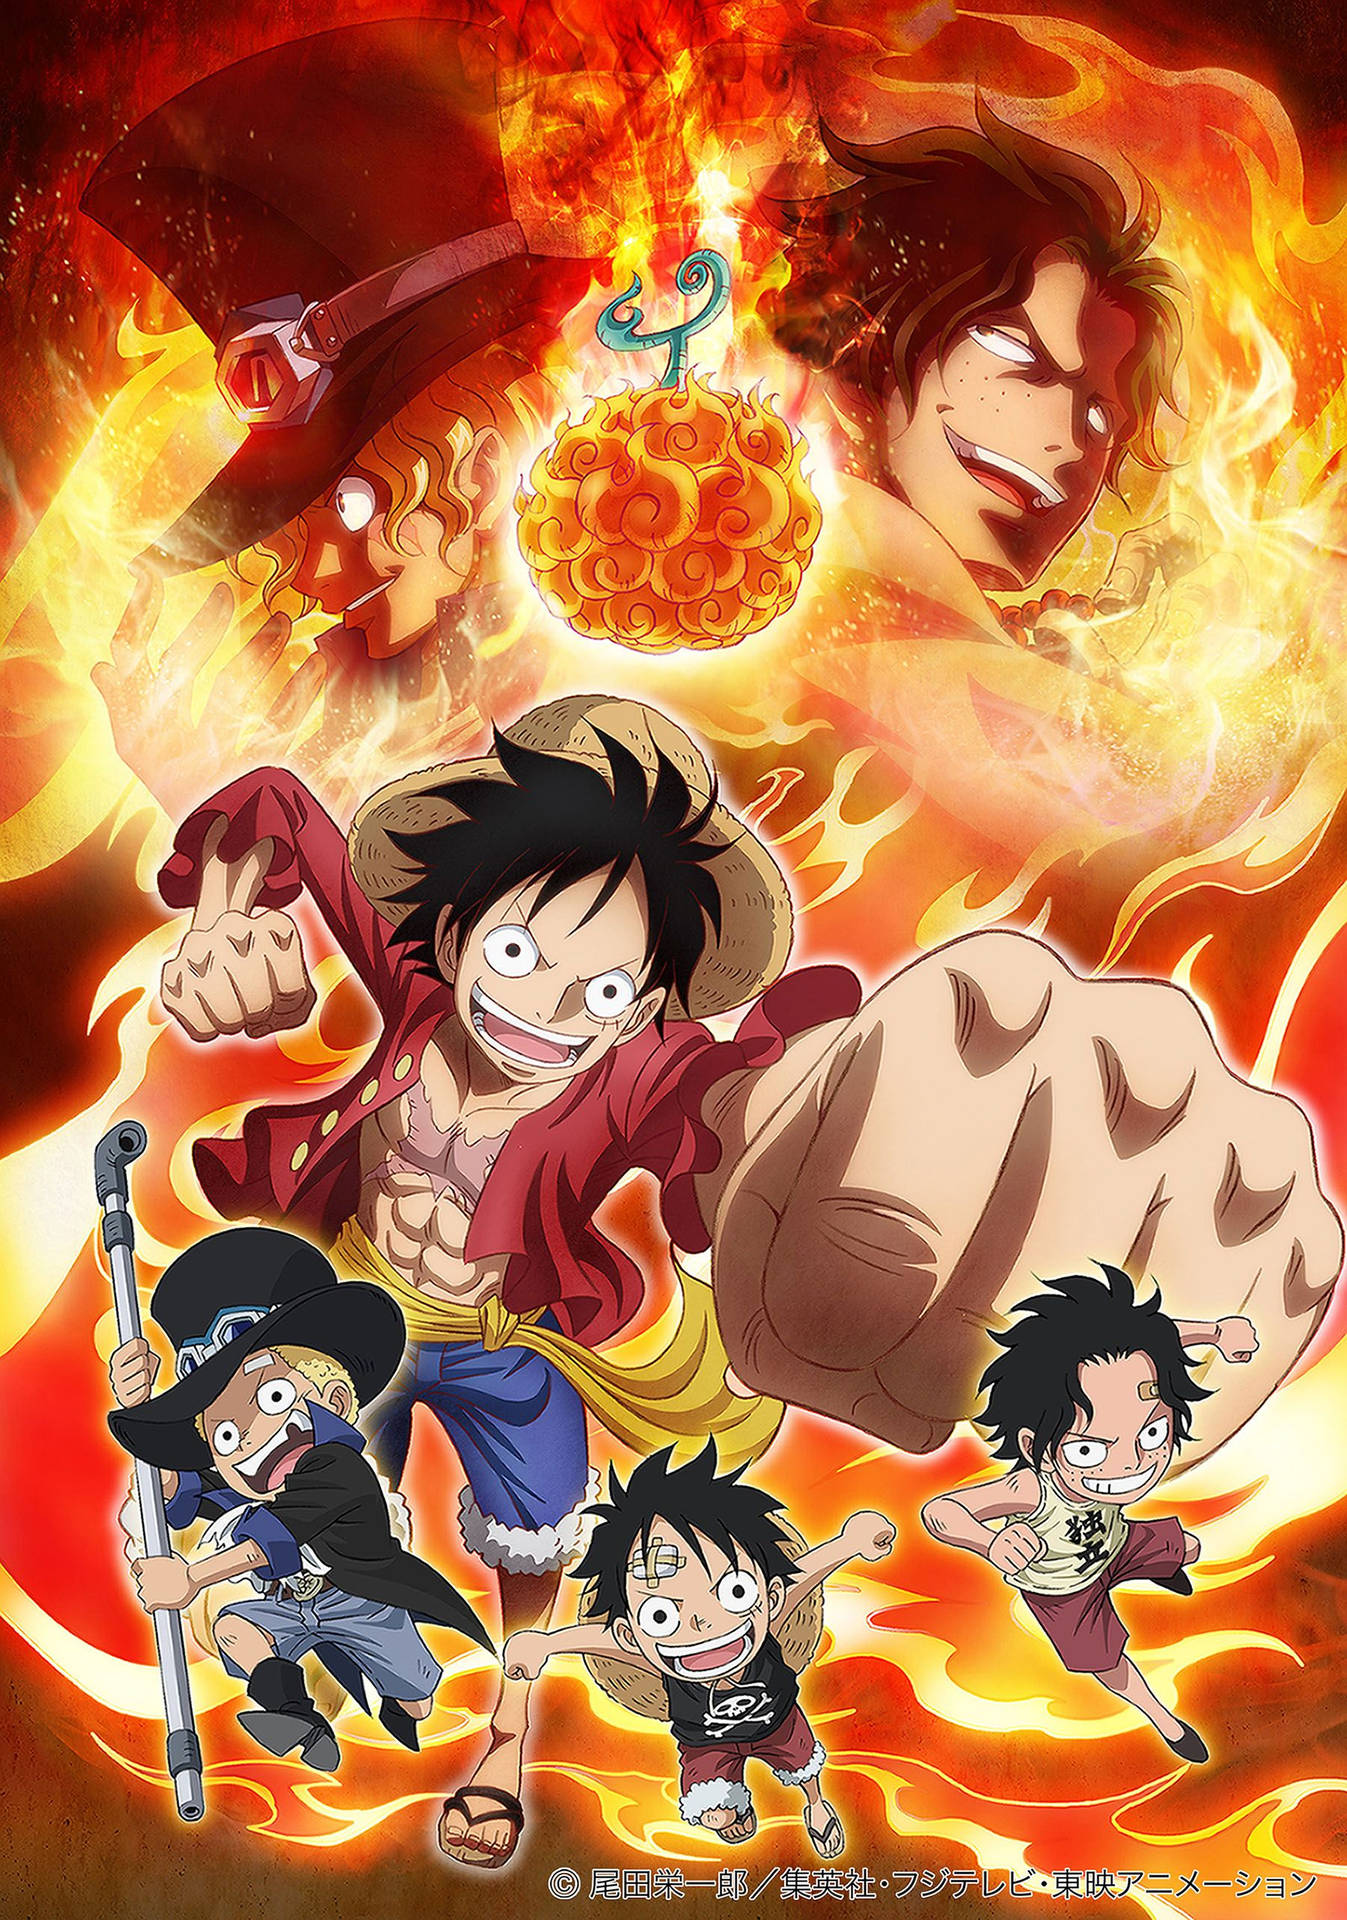 One Piece Live Wallpaper 1 Free Android Live Wallpaper download  Download  the Free One Piece Live Wallpaper 1 Live Wallpaper to your Android phone or  tablet